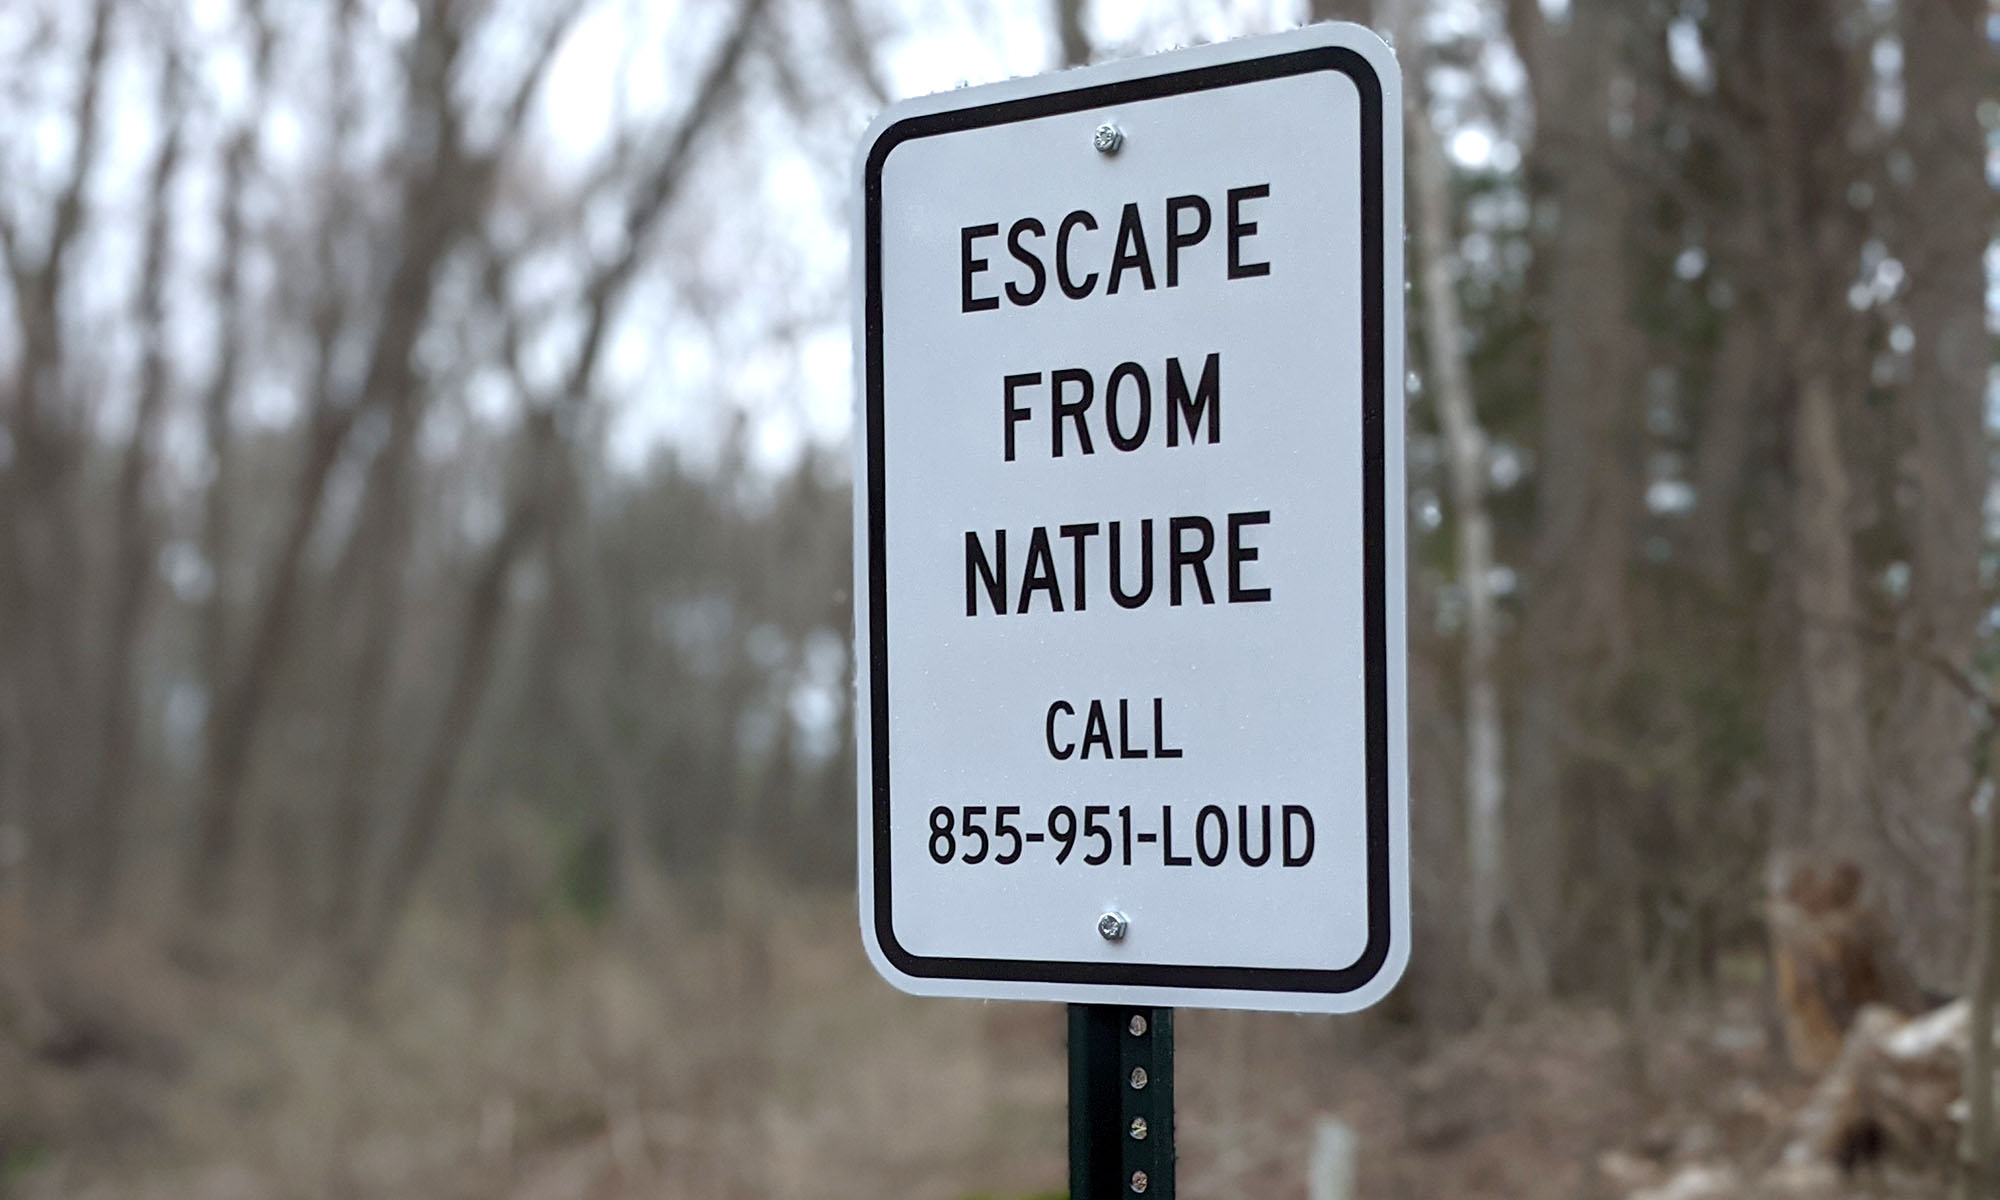 ESCAPE FROM NATURE